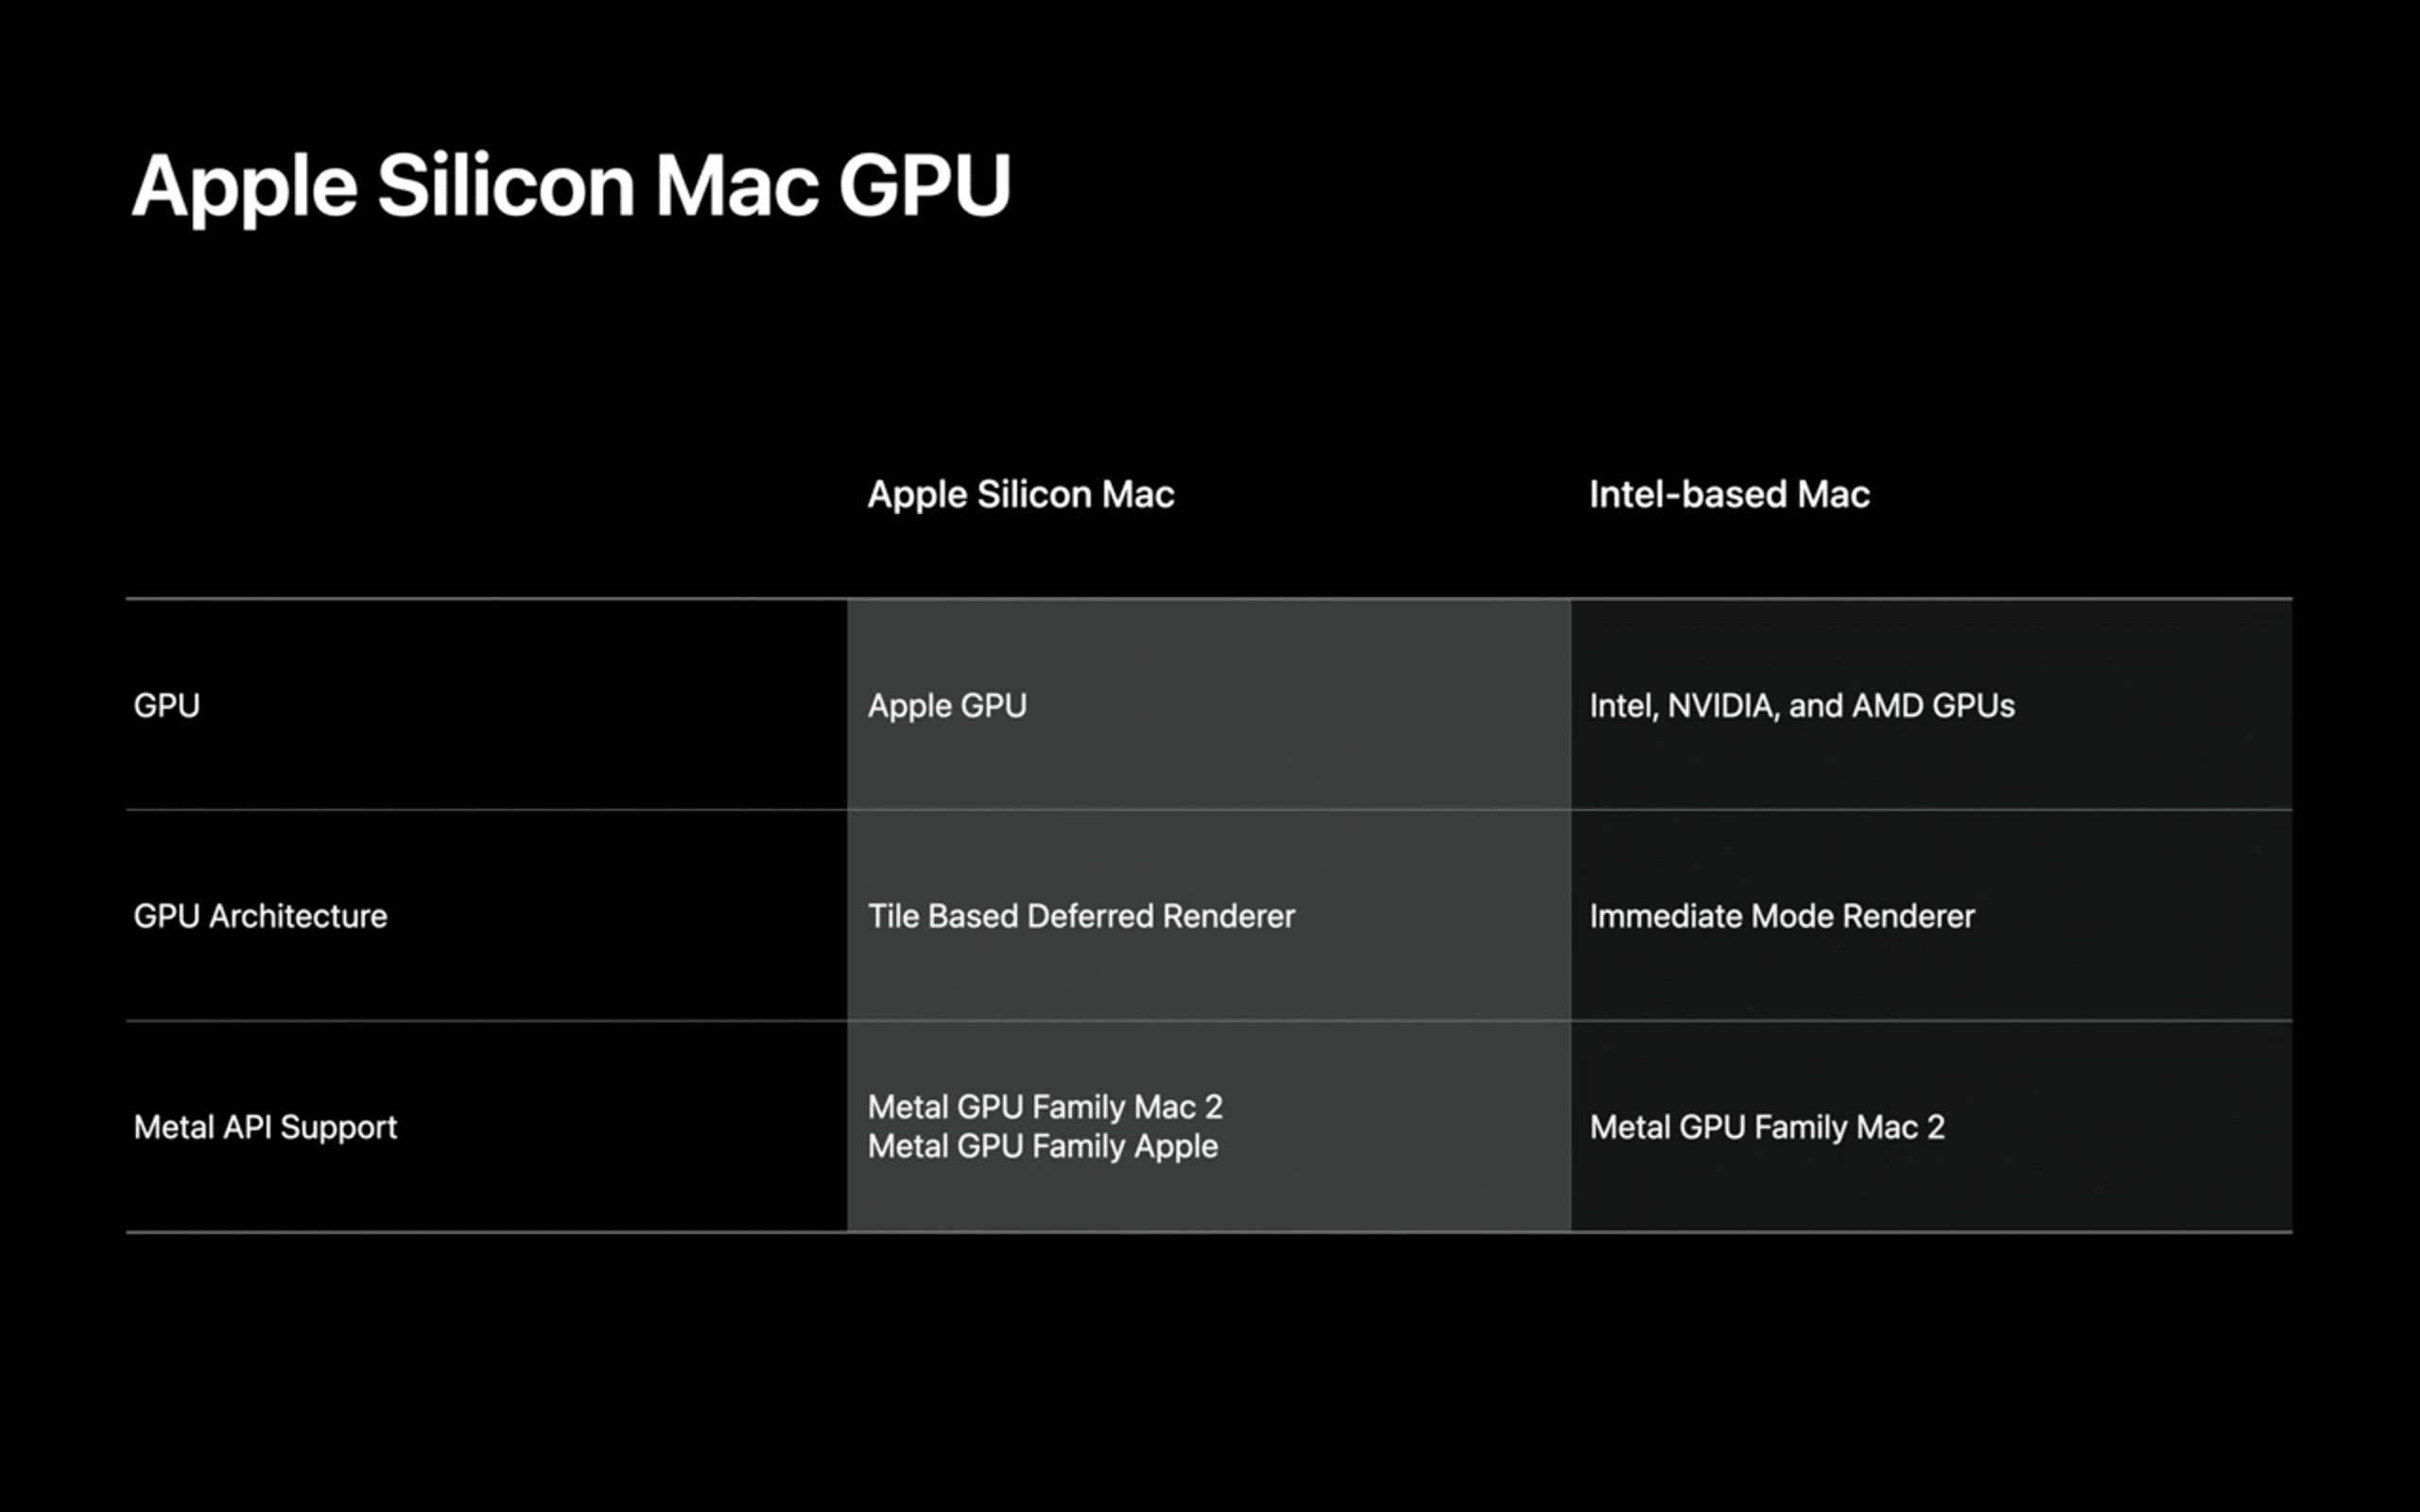 Apple does not provide dedicated AMD or NVIDIA GPUs on Macs with its own chips